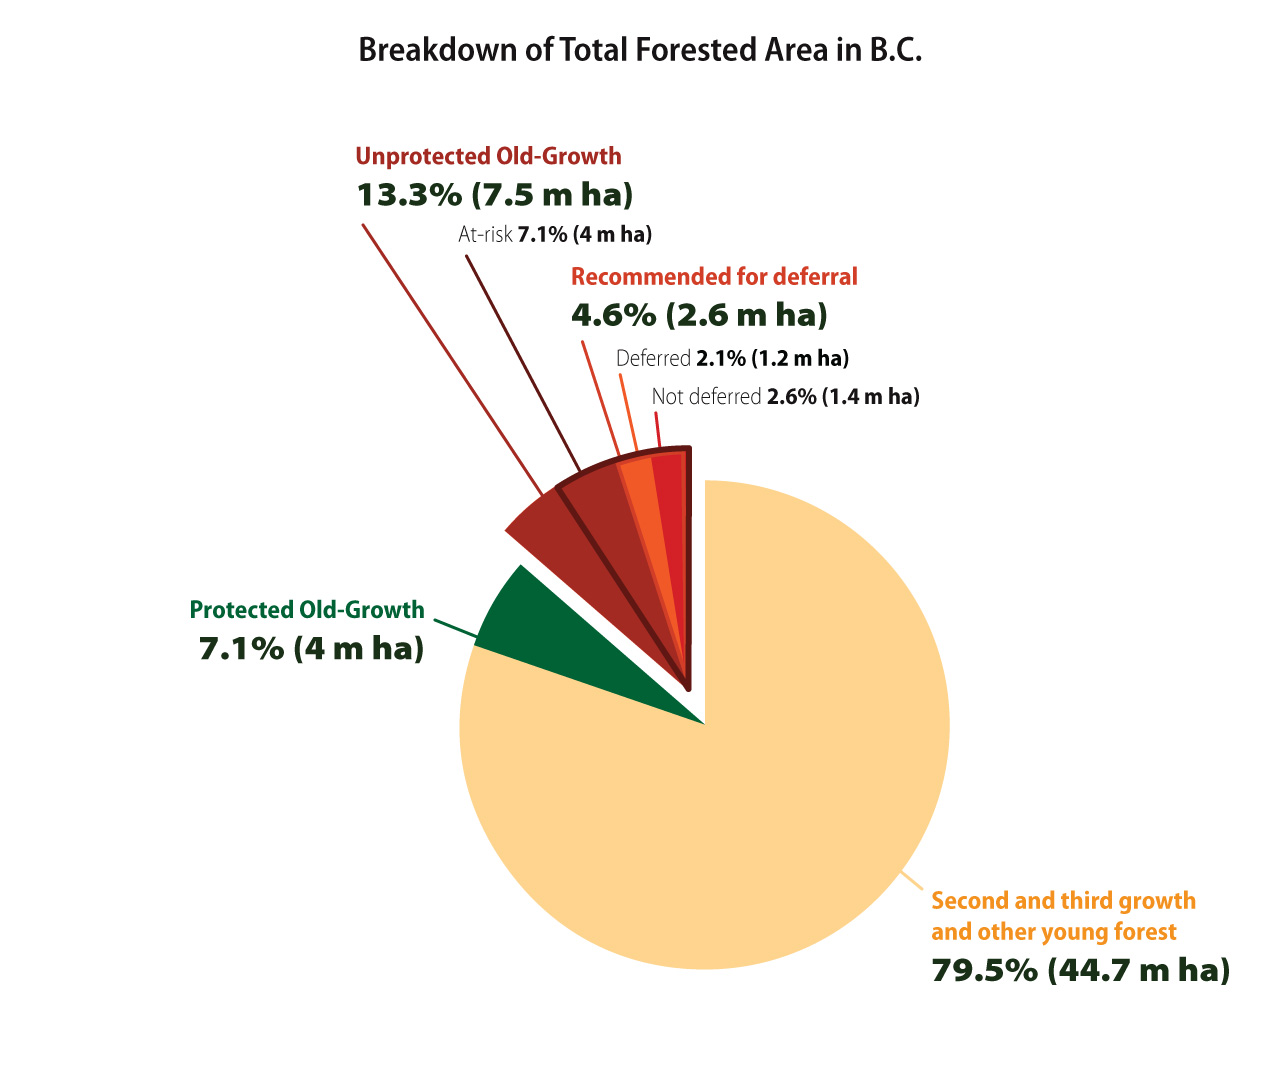 A graph showing that only a small chunk of old-growth forests are protected in B.C. End of image description.